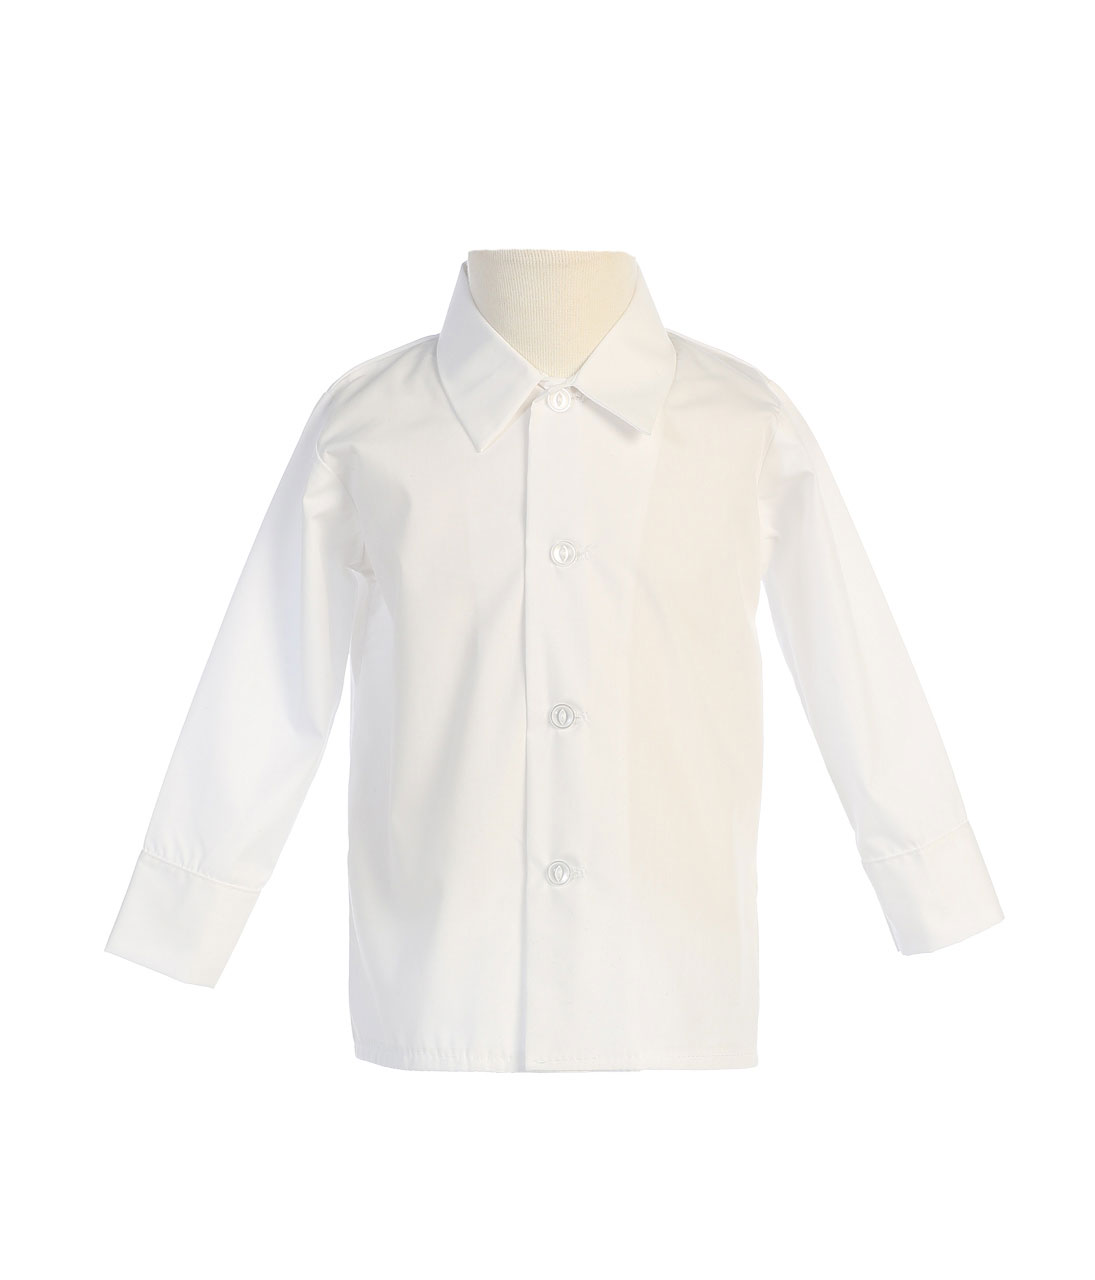 Boys Long Sleeved Simple Dress Shirt - Available in White 4T